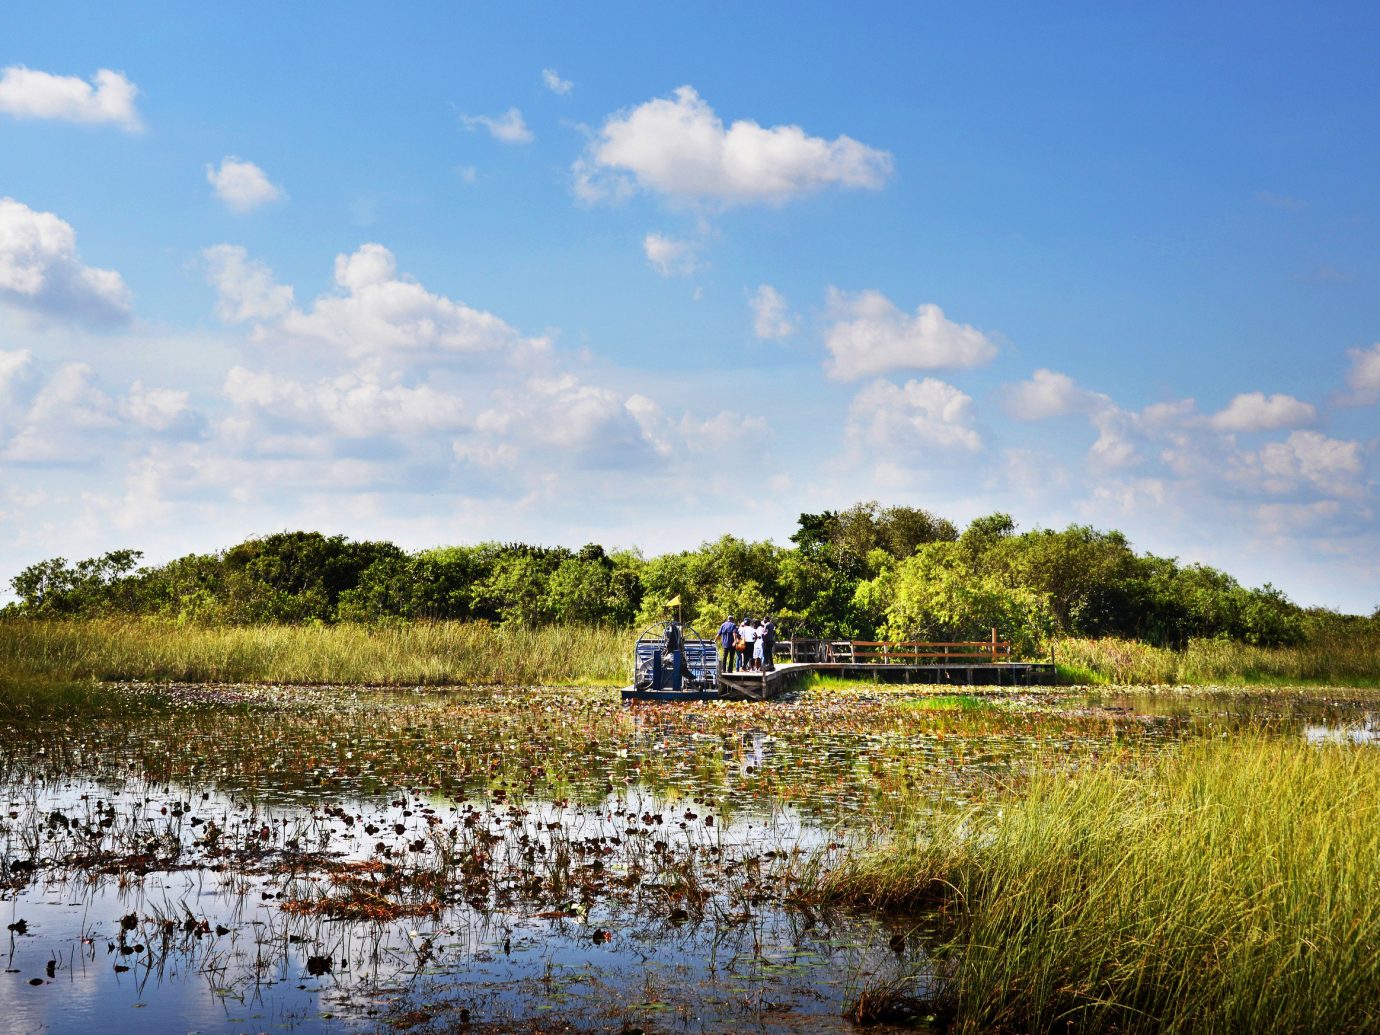 Florida Miami National Parks Outdoors + Adventure Trip Ideas Weekend Getaways outdoor sky grass water habitat Nature River reflection geographical feature shore natural environment pond wetland cloud marsh Lake loch morning rural area landscape waterway vehicle Sea reservoir day